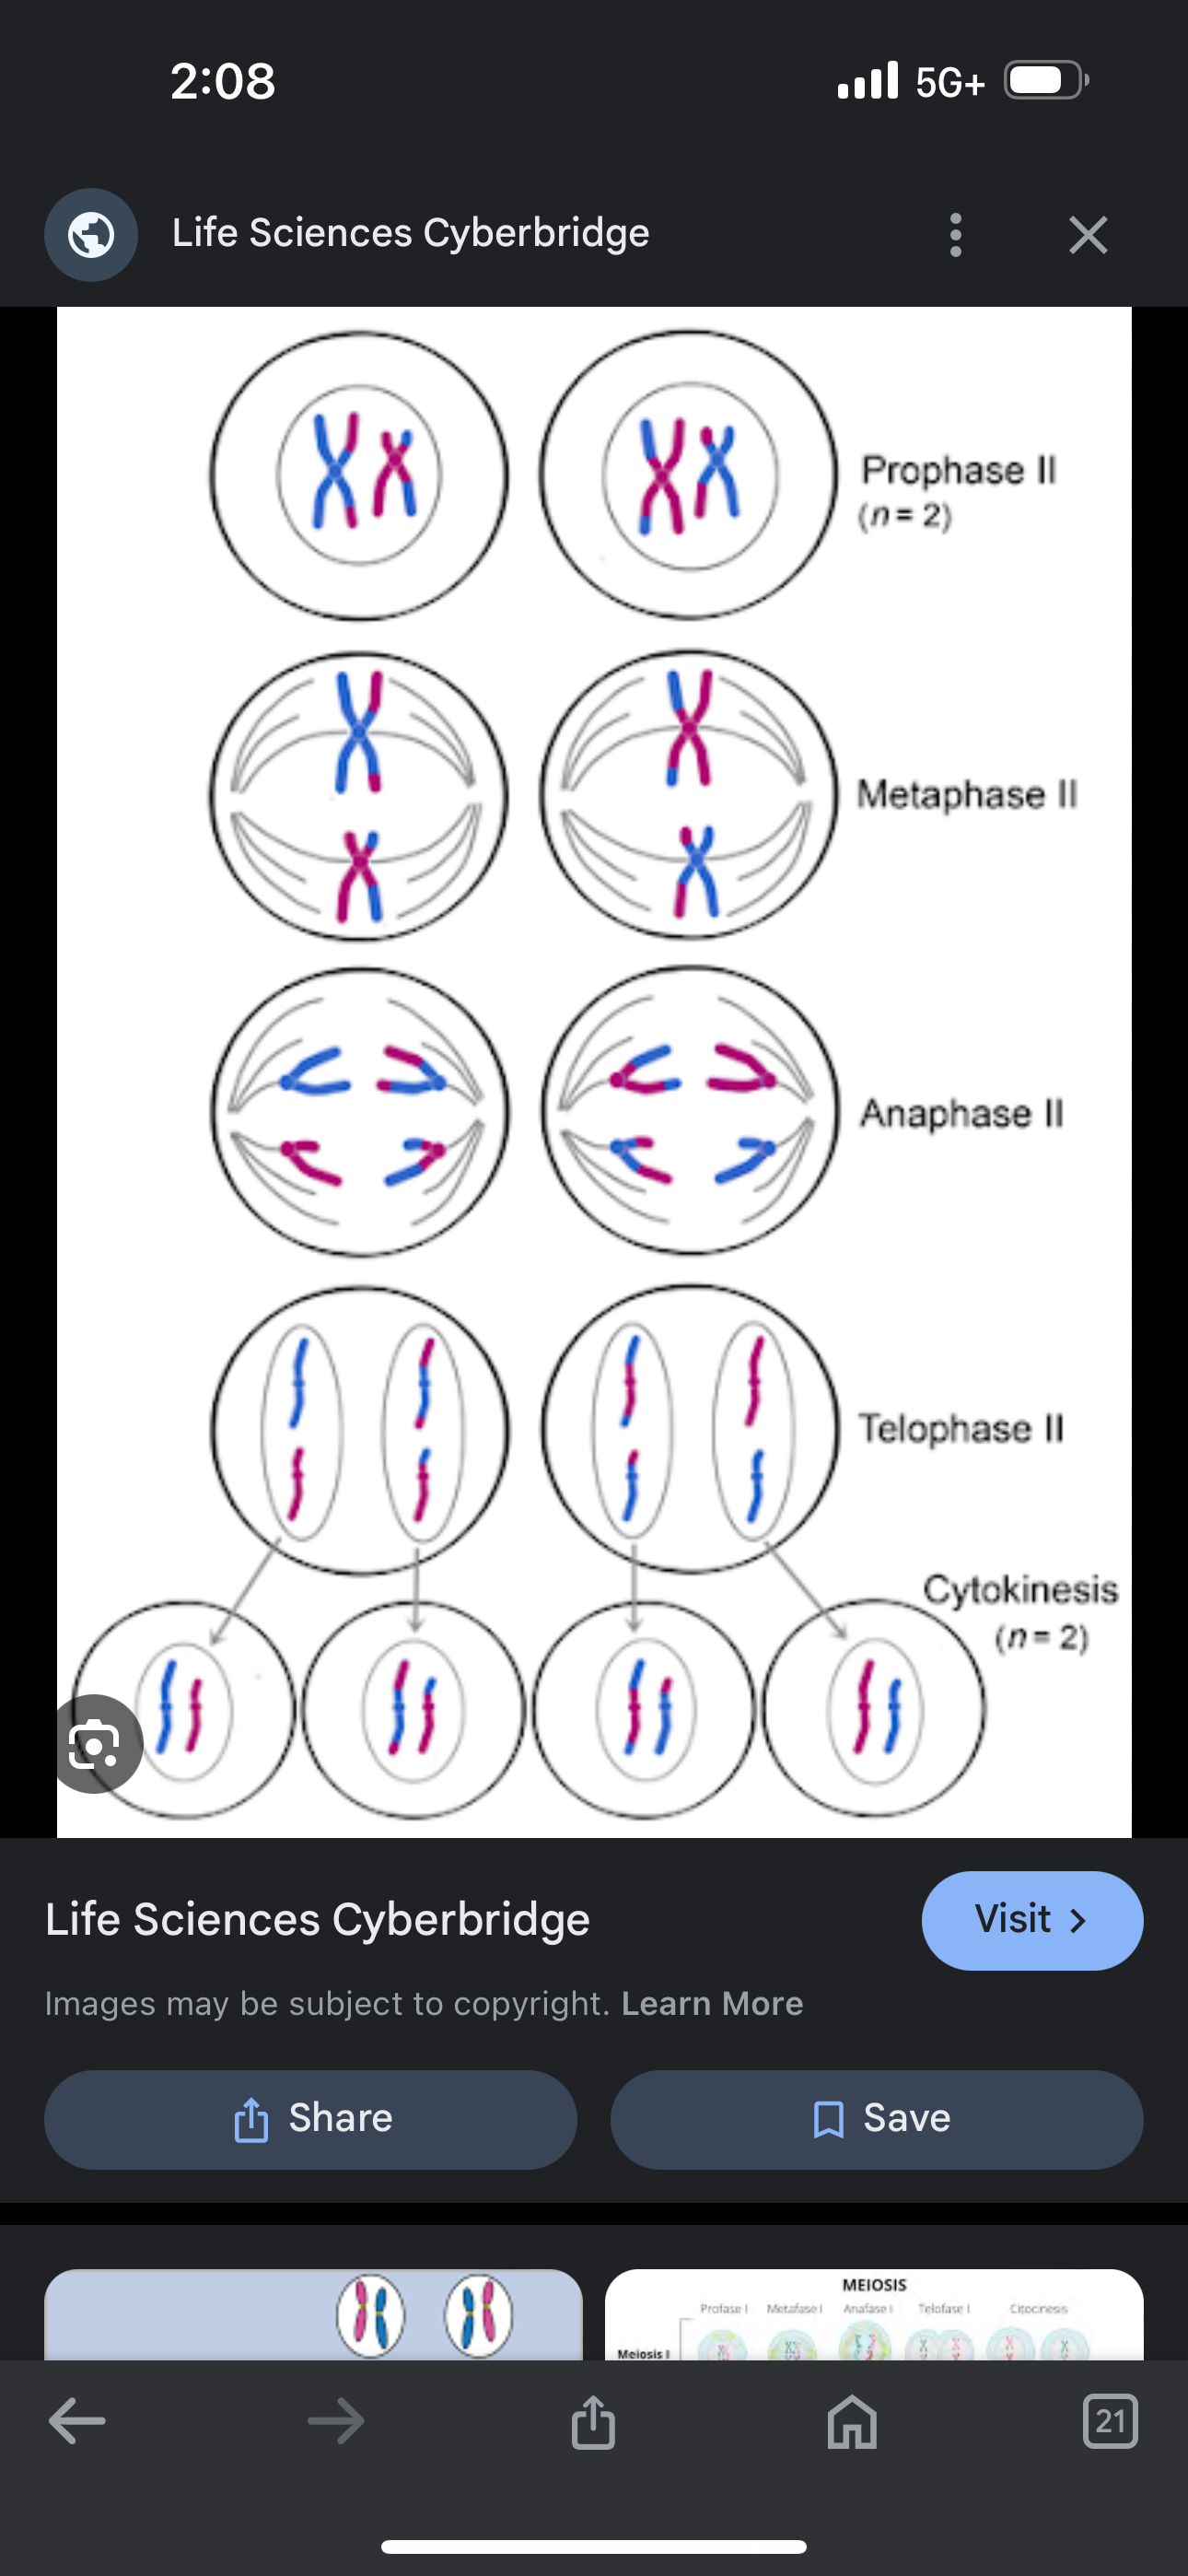 <p>Prophase- nuclear membrane dissolves</p><p>Metaphase 2- chromosomes (2 chromotids) line up on the equator</p><p>Anaphase 2- nuclear membrane begins to form around the chromatids now called chromosomes</p><p>Telophase and cytokinesis- nuclear membrane form, 4 daughter cells produced</p>